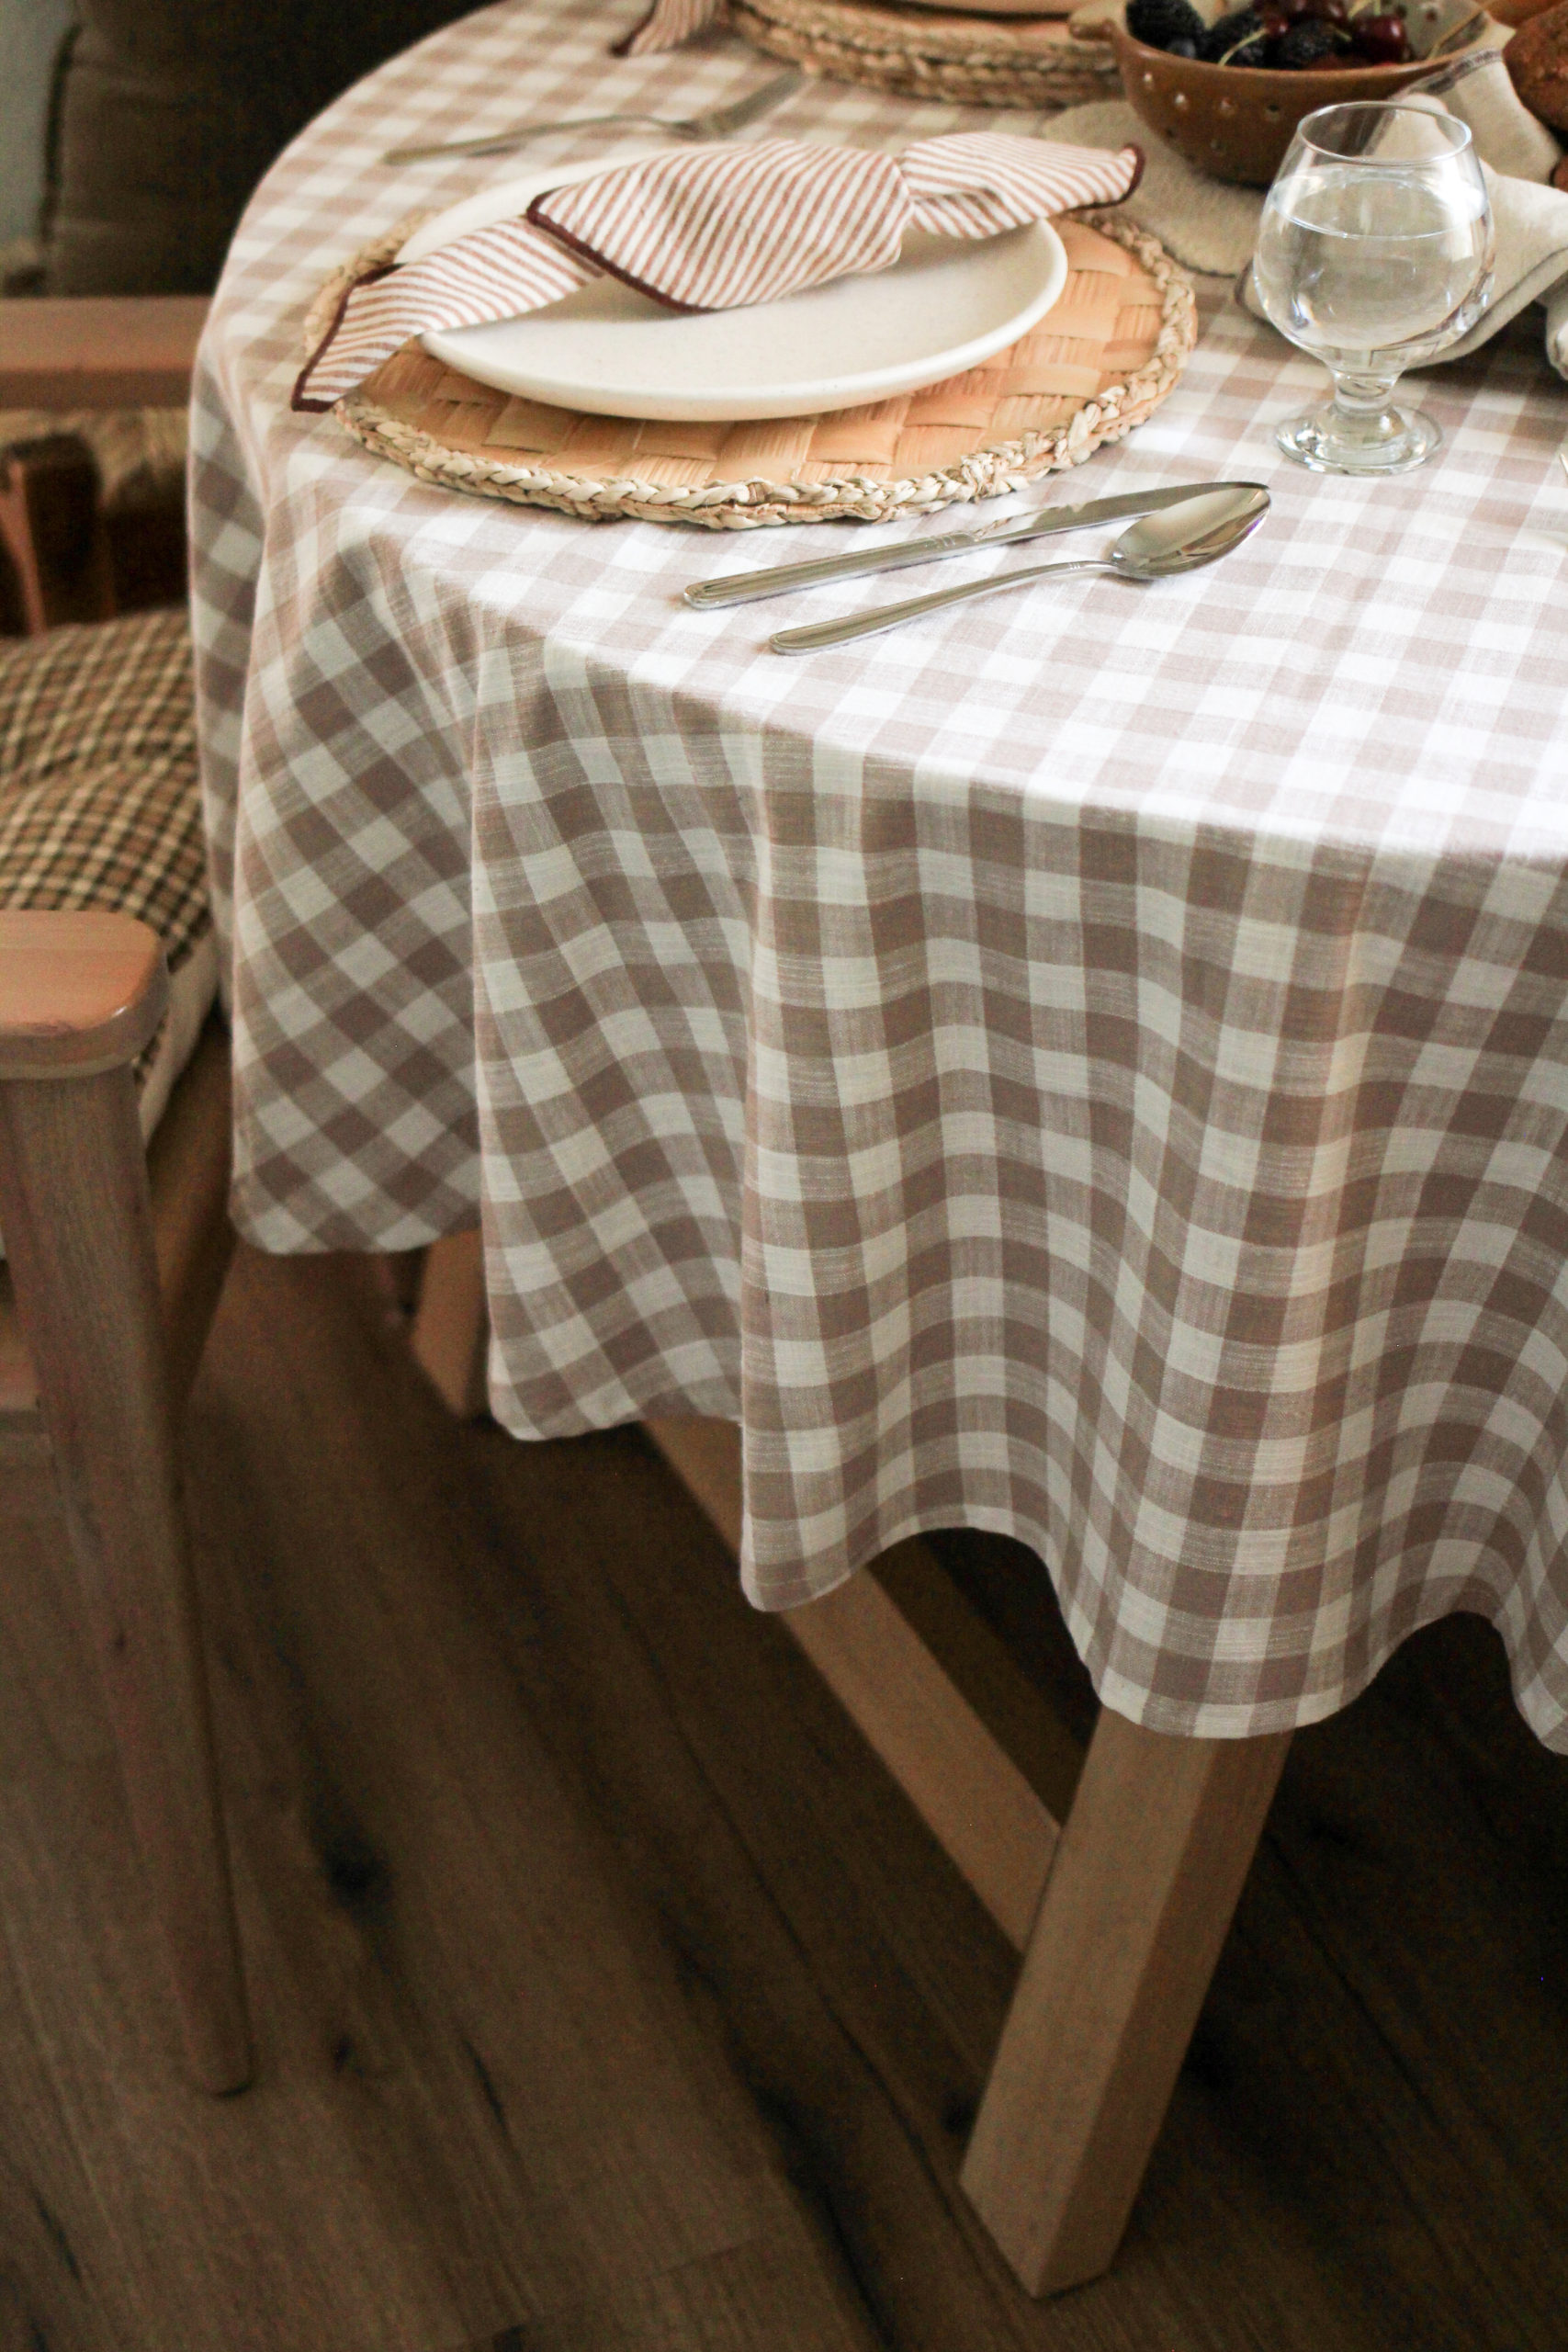 Round table, featuring gingham tablecloth.